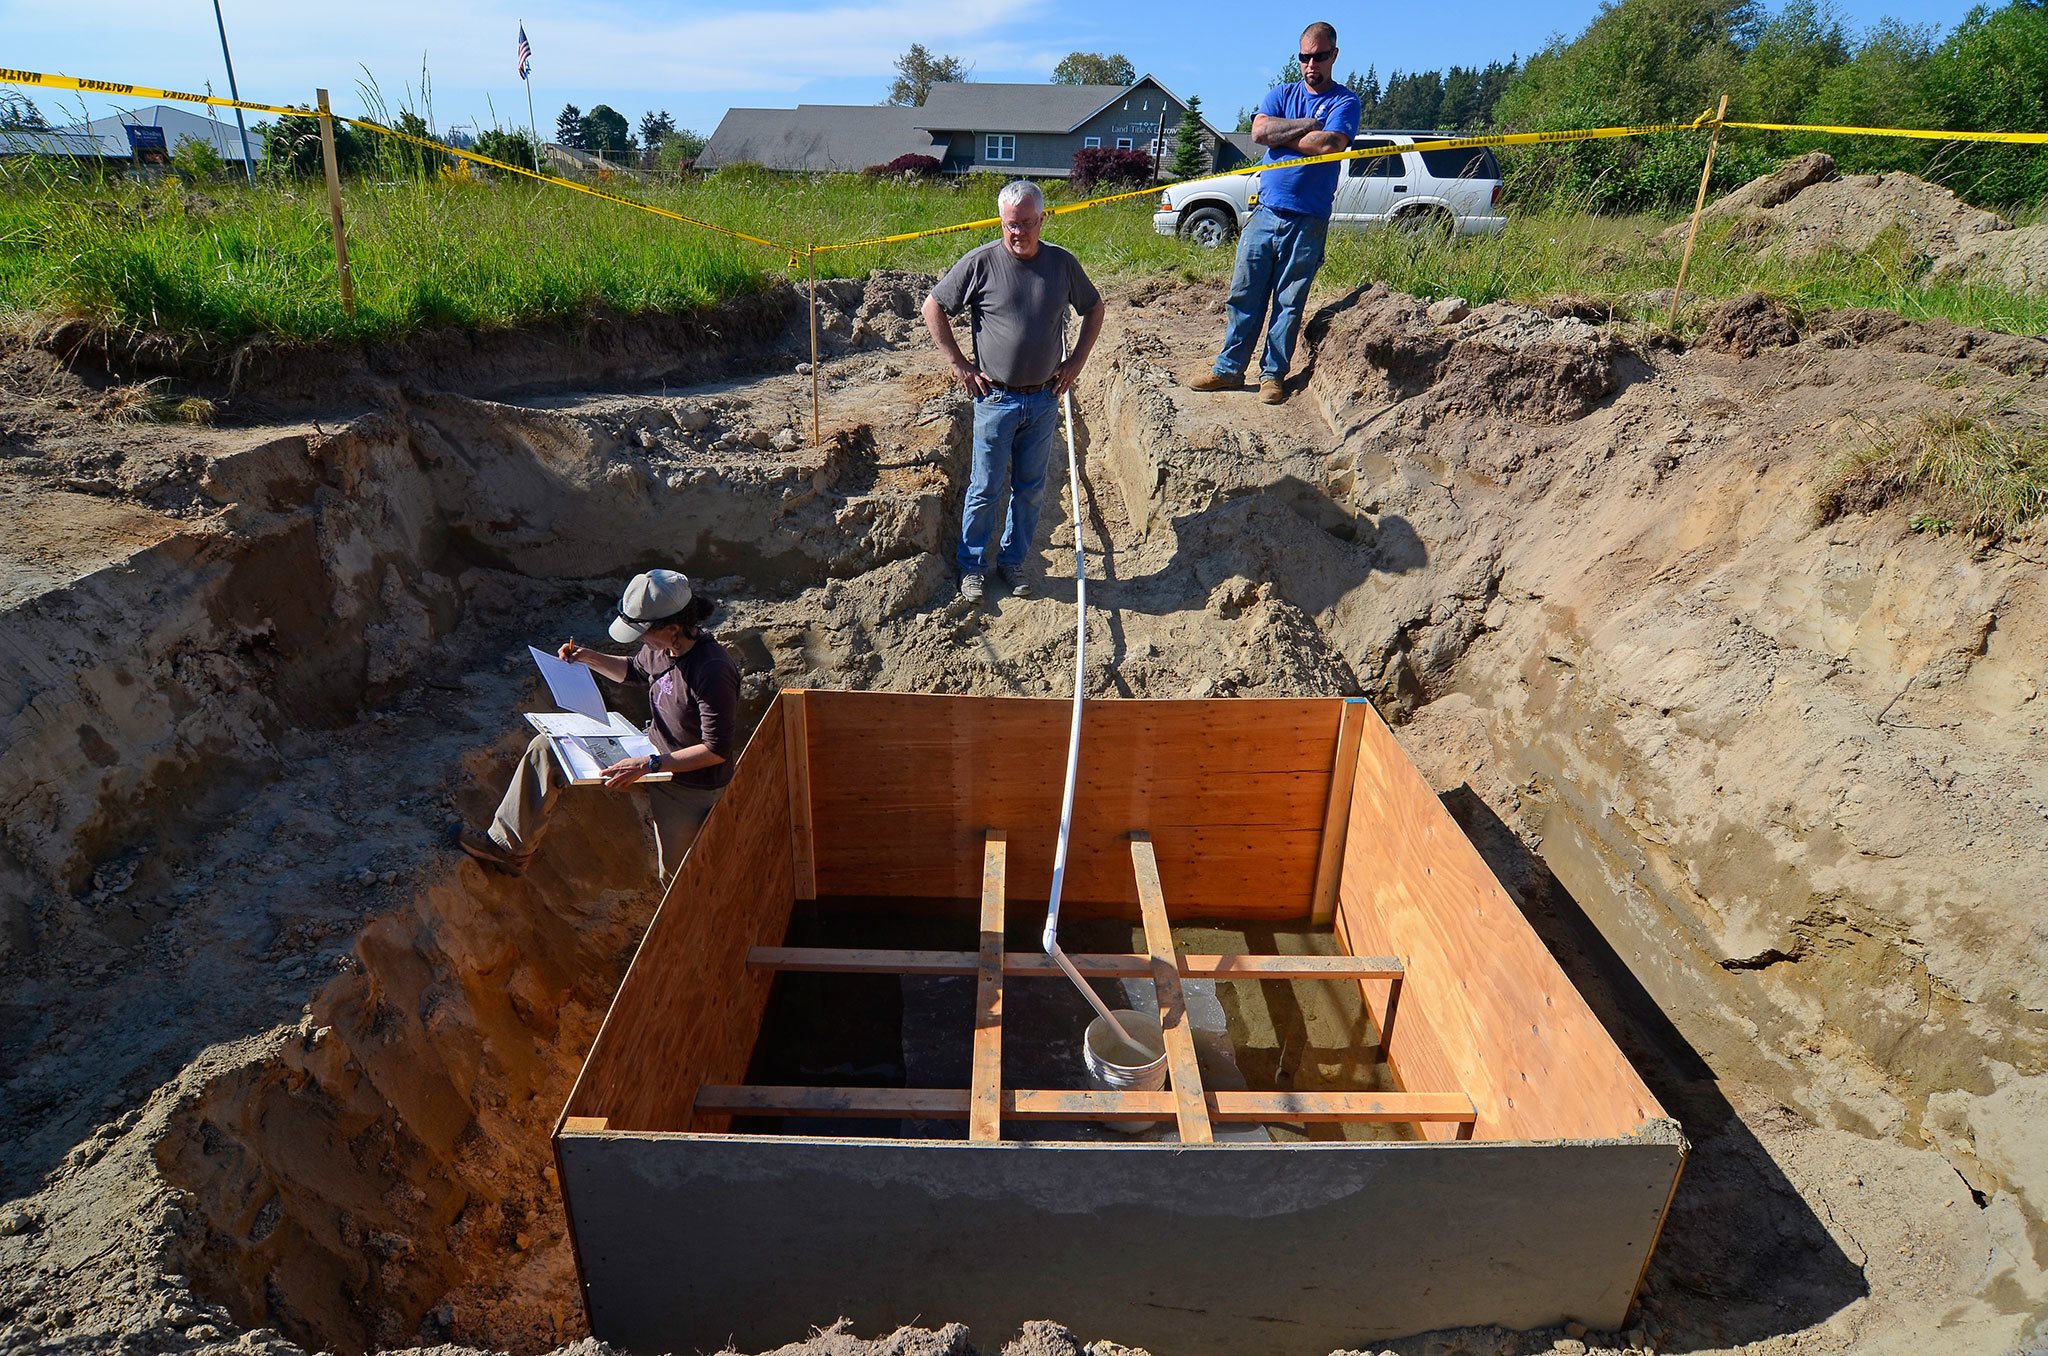 Dawn M. Chapel, a hydrogeologist with Pacific Groundwater Group, marks down drainage rates at one of several test pits in May of 2015 on a 24-acre property off Highway 525. The Freeland Water Sewer District had several tests performed prior to purchasing the land late last year for the phase 1 A sewer project. District commissioners recently learned, however, the technology it planned to utilize to disperse treated effluent back into the ground may be more expensive and less effective than initially believed, putting the property’s viability for infiltration into question.